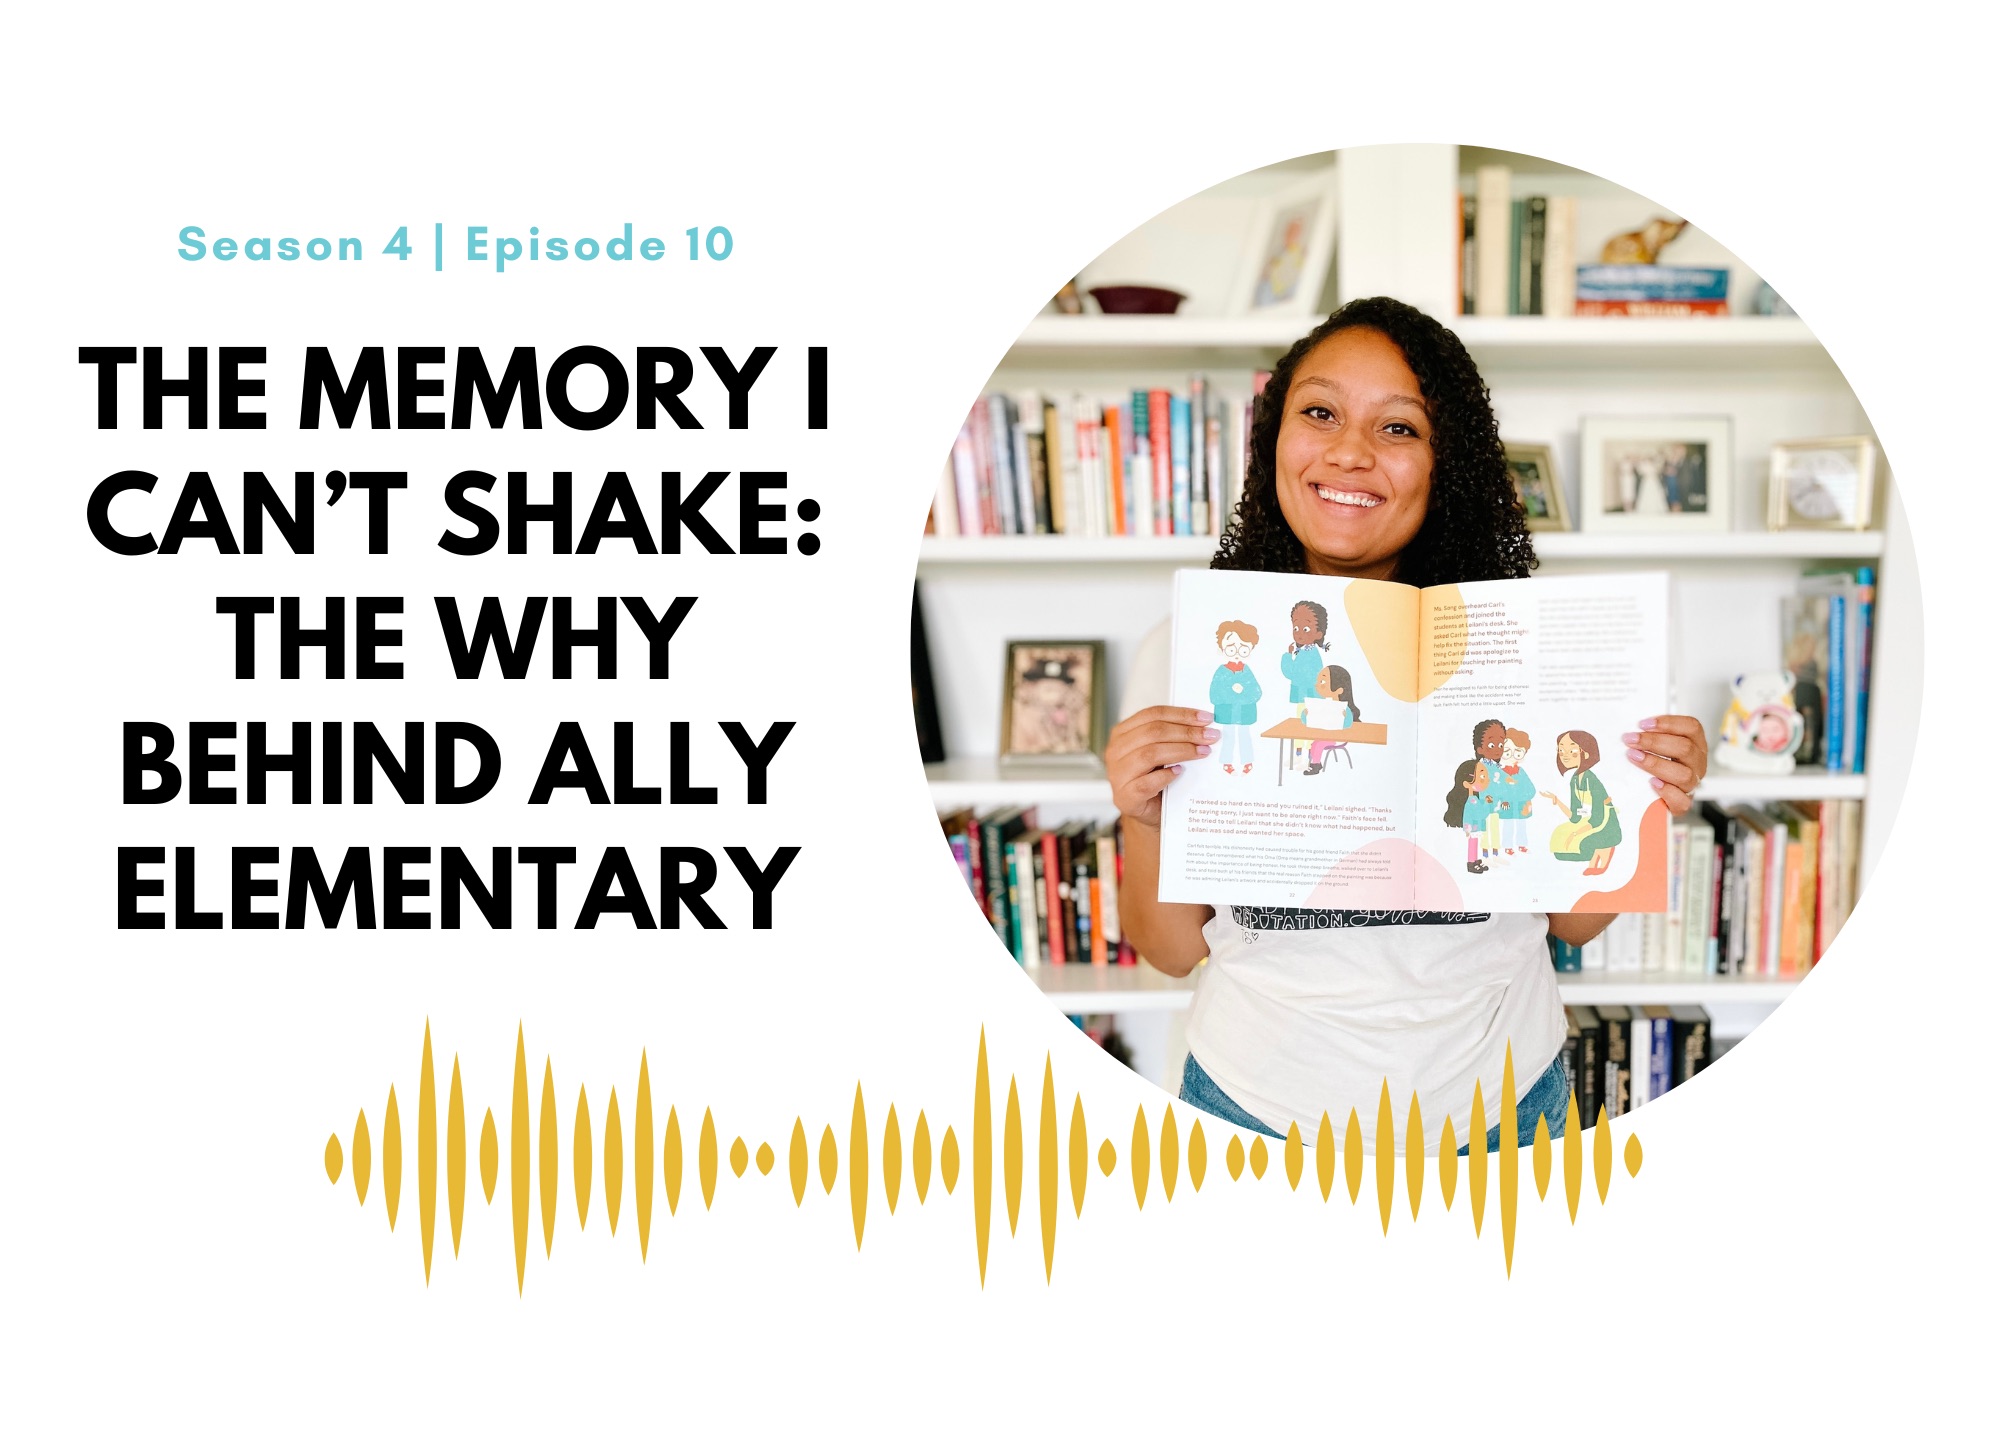 The Memory That I Can’t Shake: The Why Behind Ally Elementary